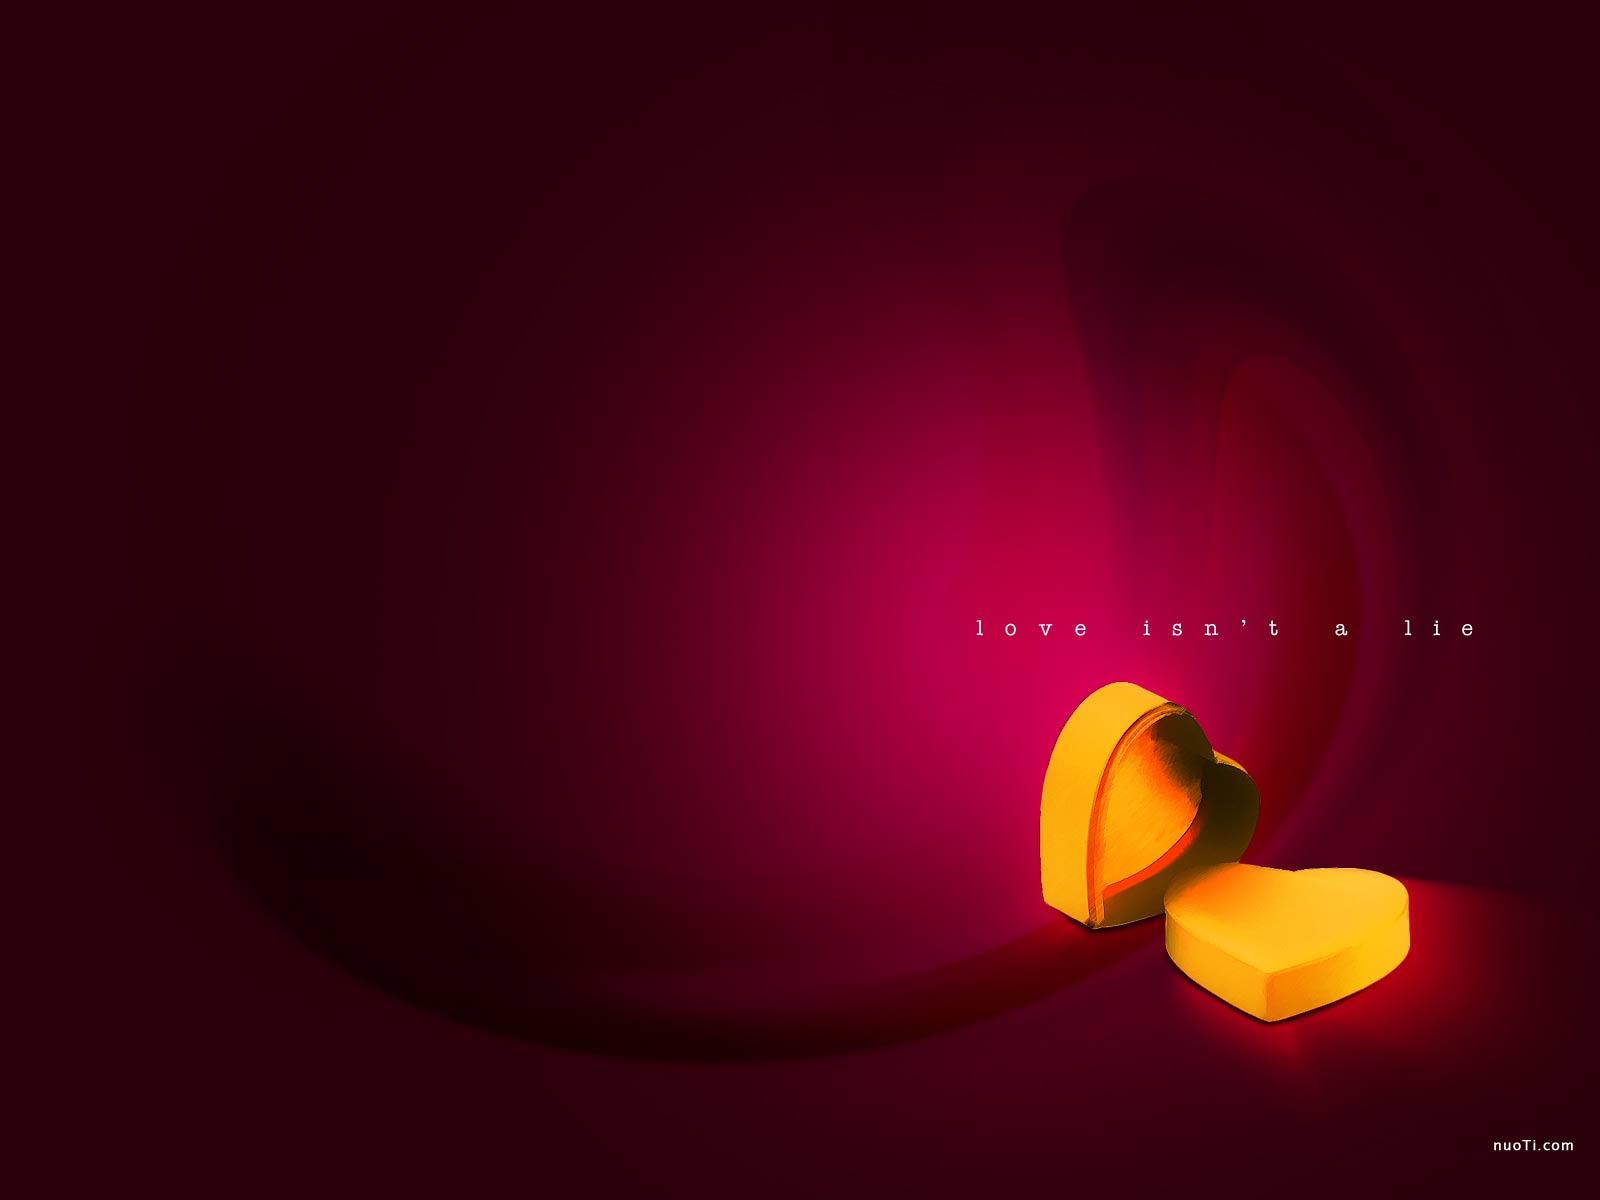 Free Love Frames For Valentine Day Background For PowerPoint